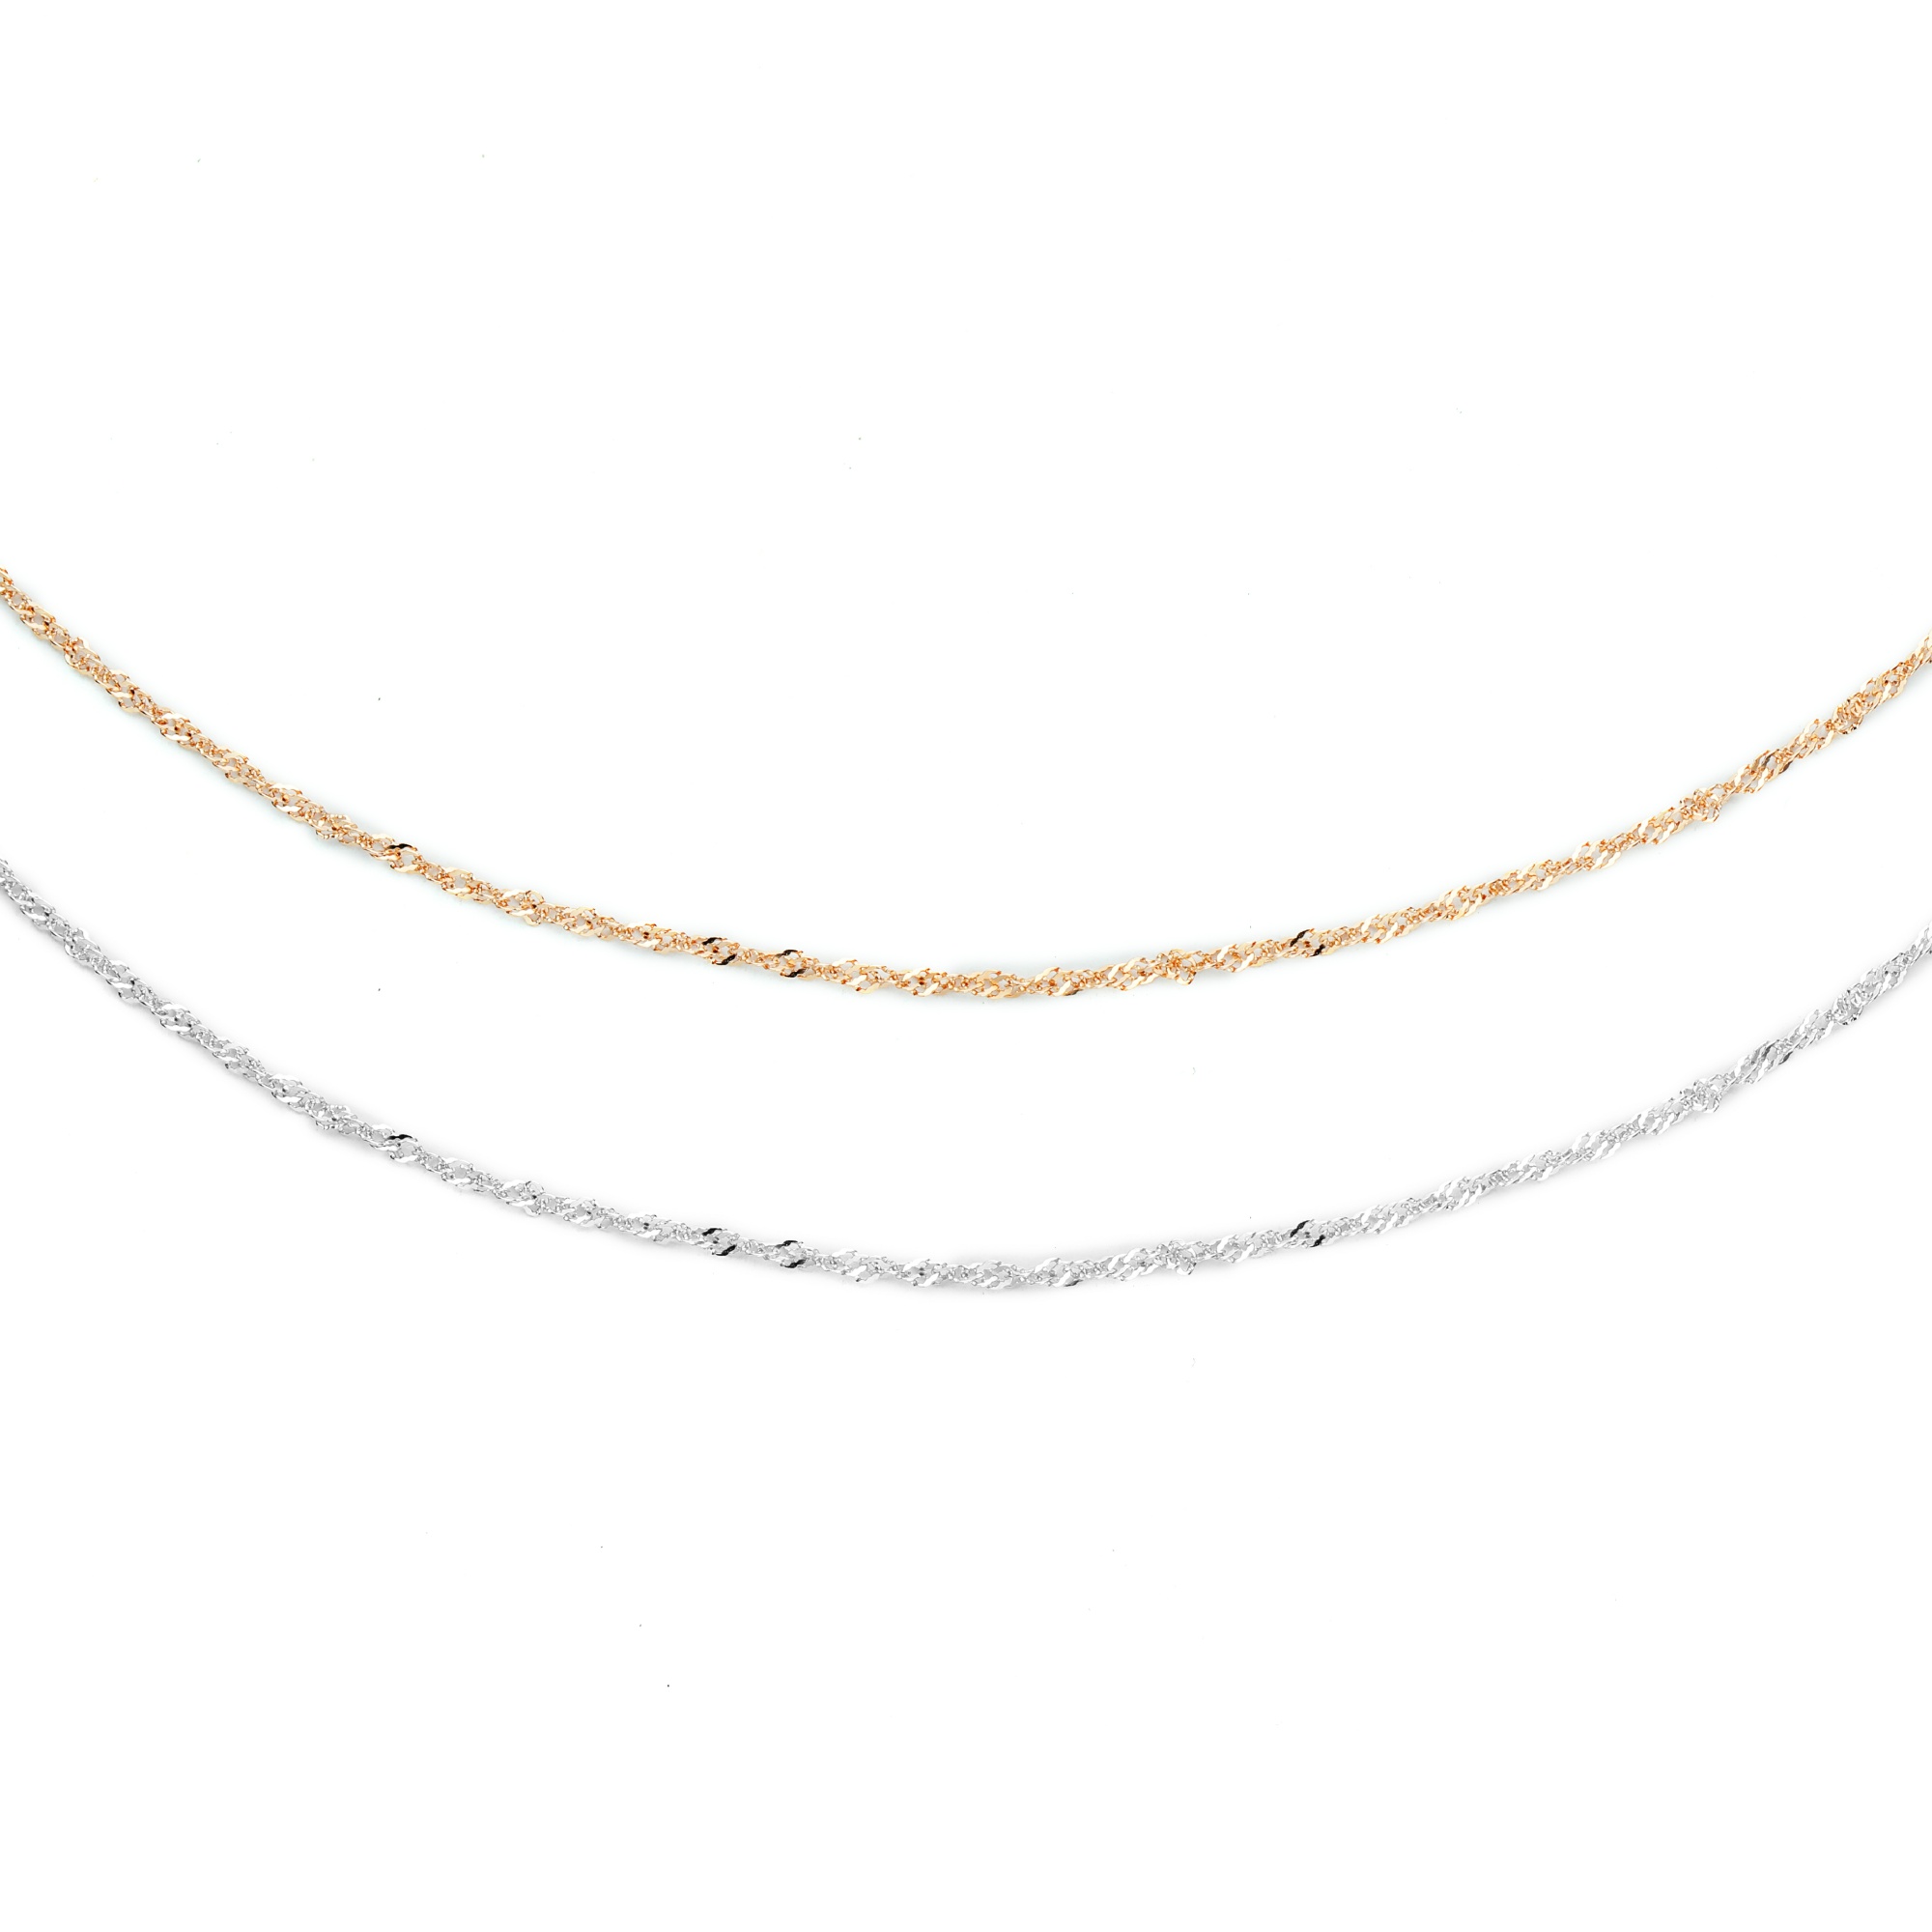 1.9MM Twisted Chain,Solid 925 Sterling Silver Rose Gold Plated Necklace Chain,Simple Chain 16Inches with 2 Inch Extension Chain 1320037 - Click Image to Close